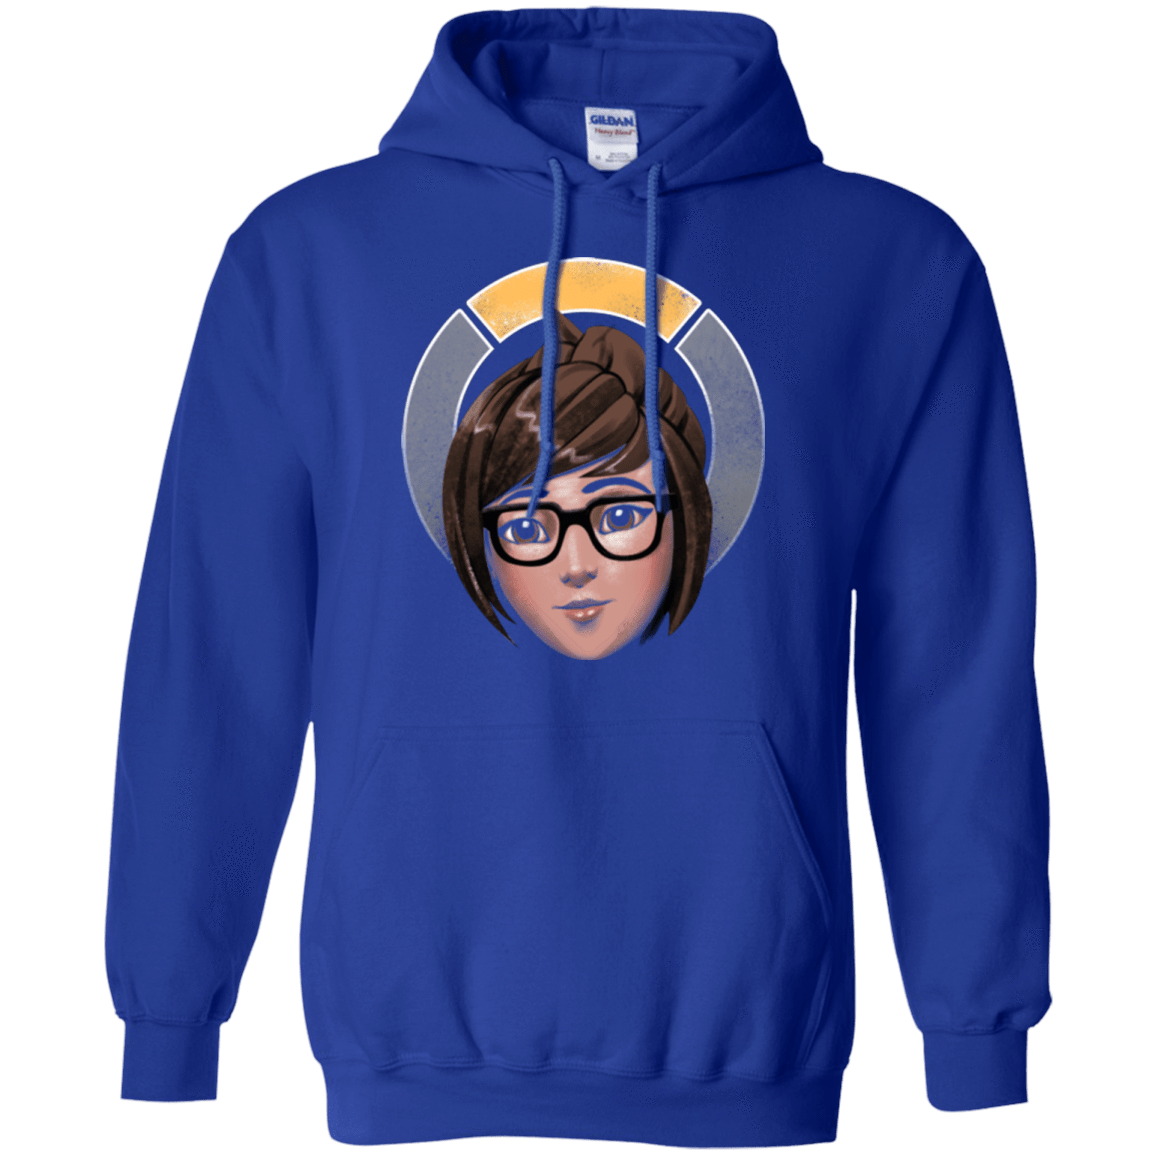 Sweatshirts Royal / Small The Climatologist Pullover Hoodie